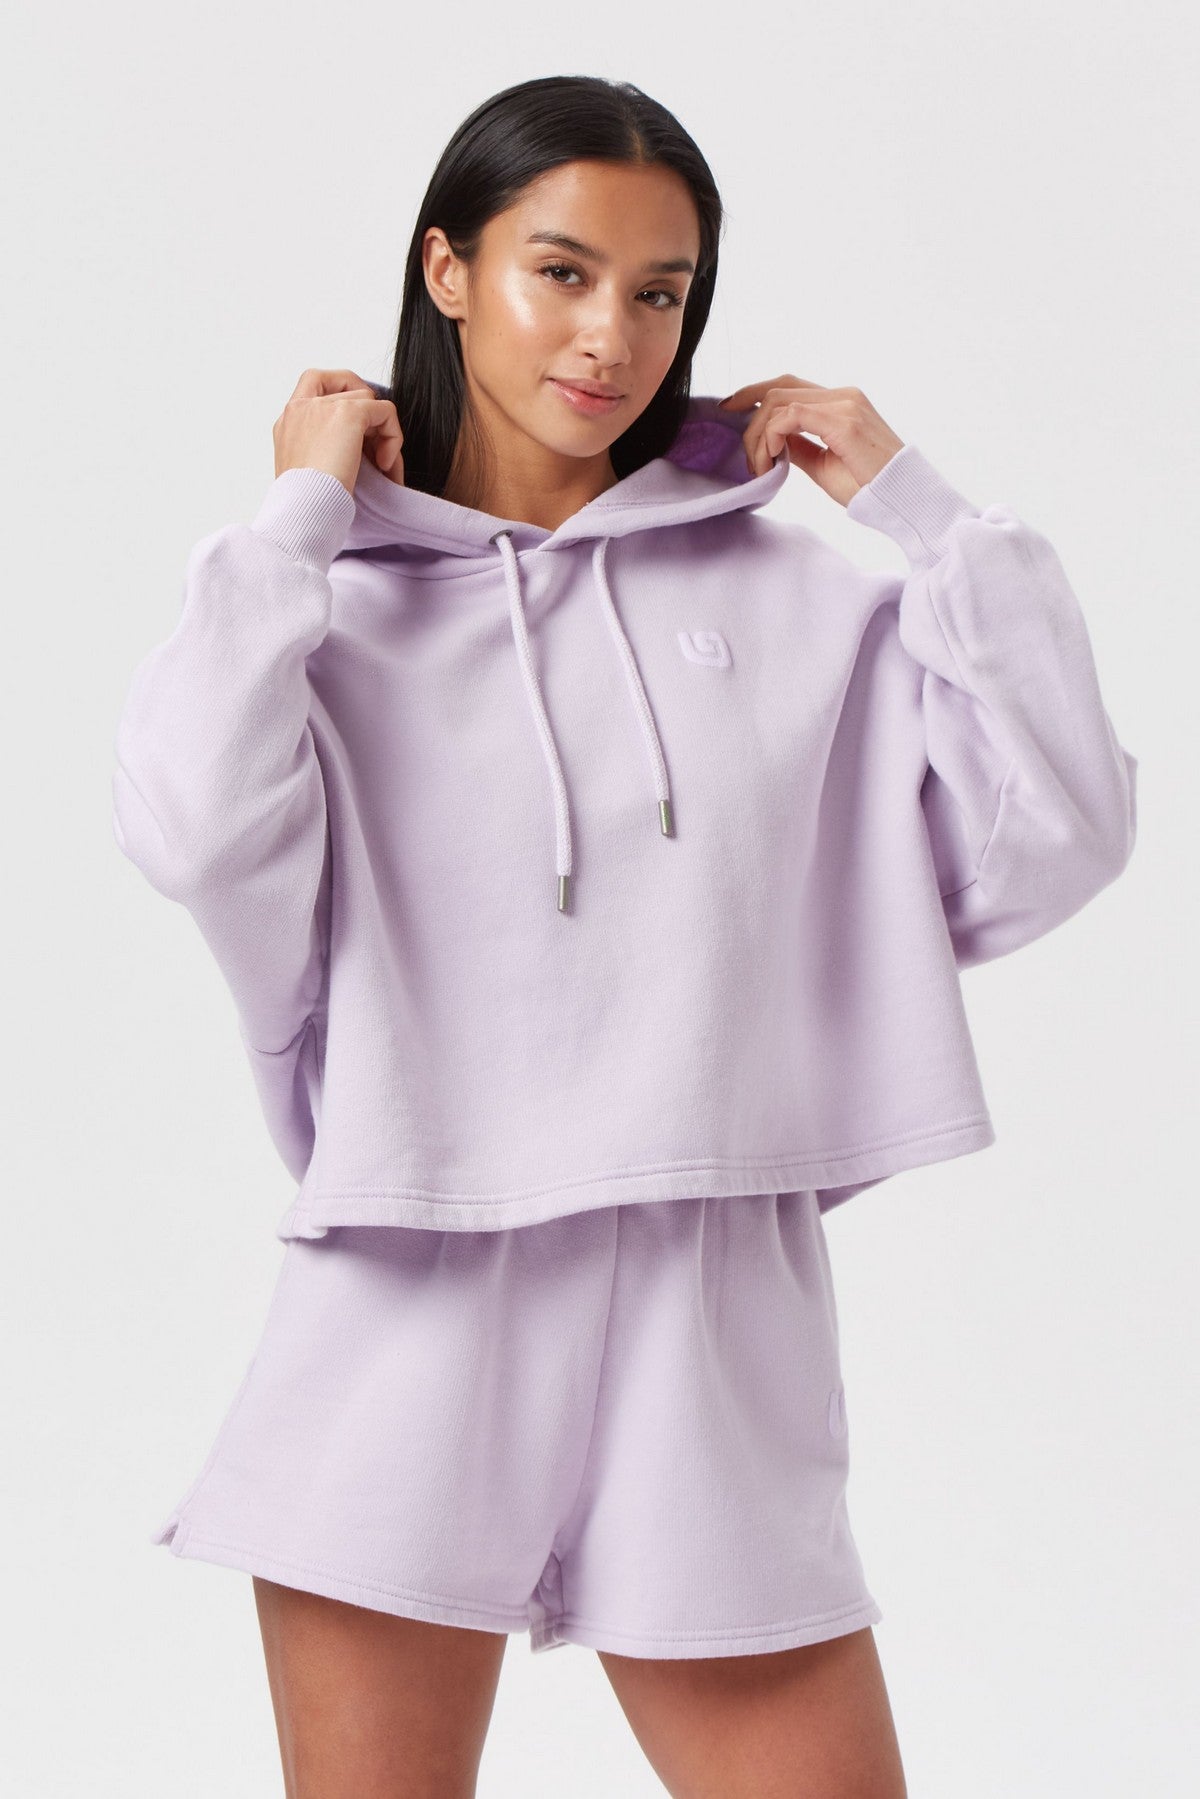 MAJI 'G' COLLECTION HOODY - LILAC - THAT GORILLA BRAND